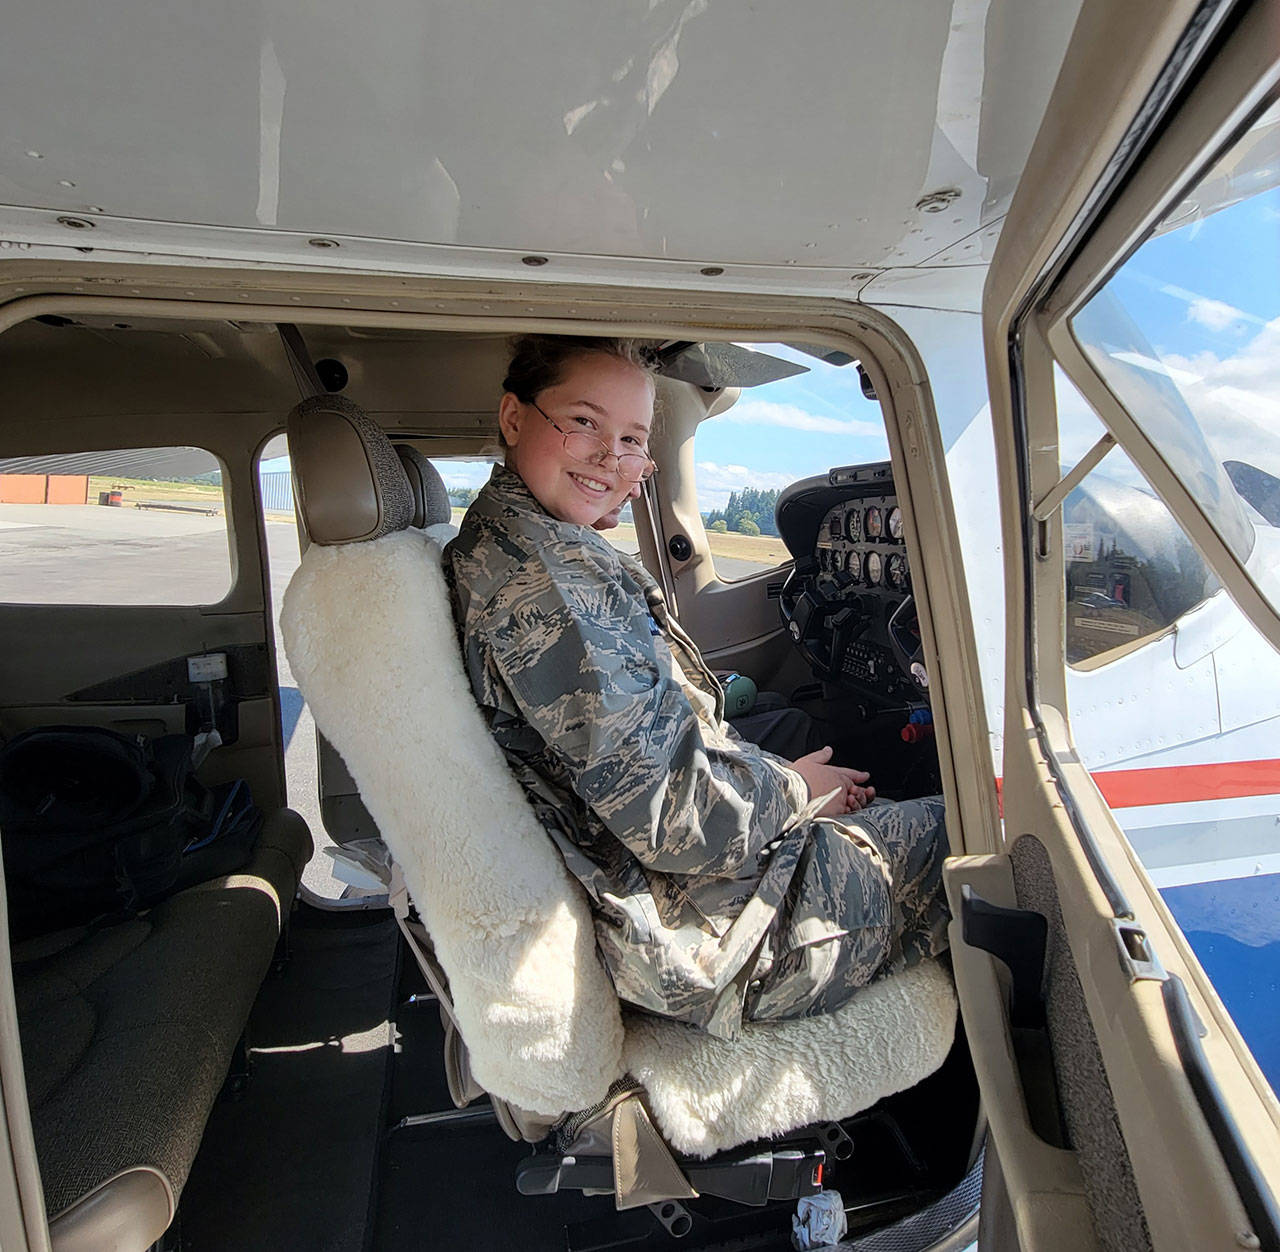 Cadet Genna Nickel of Port Angeles completes her first orientation flight with Civil Air Patrol on Aug. 8.